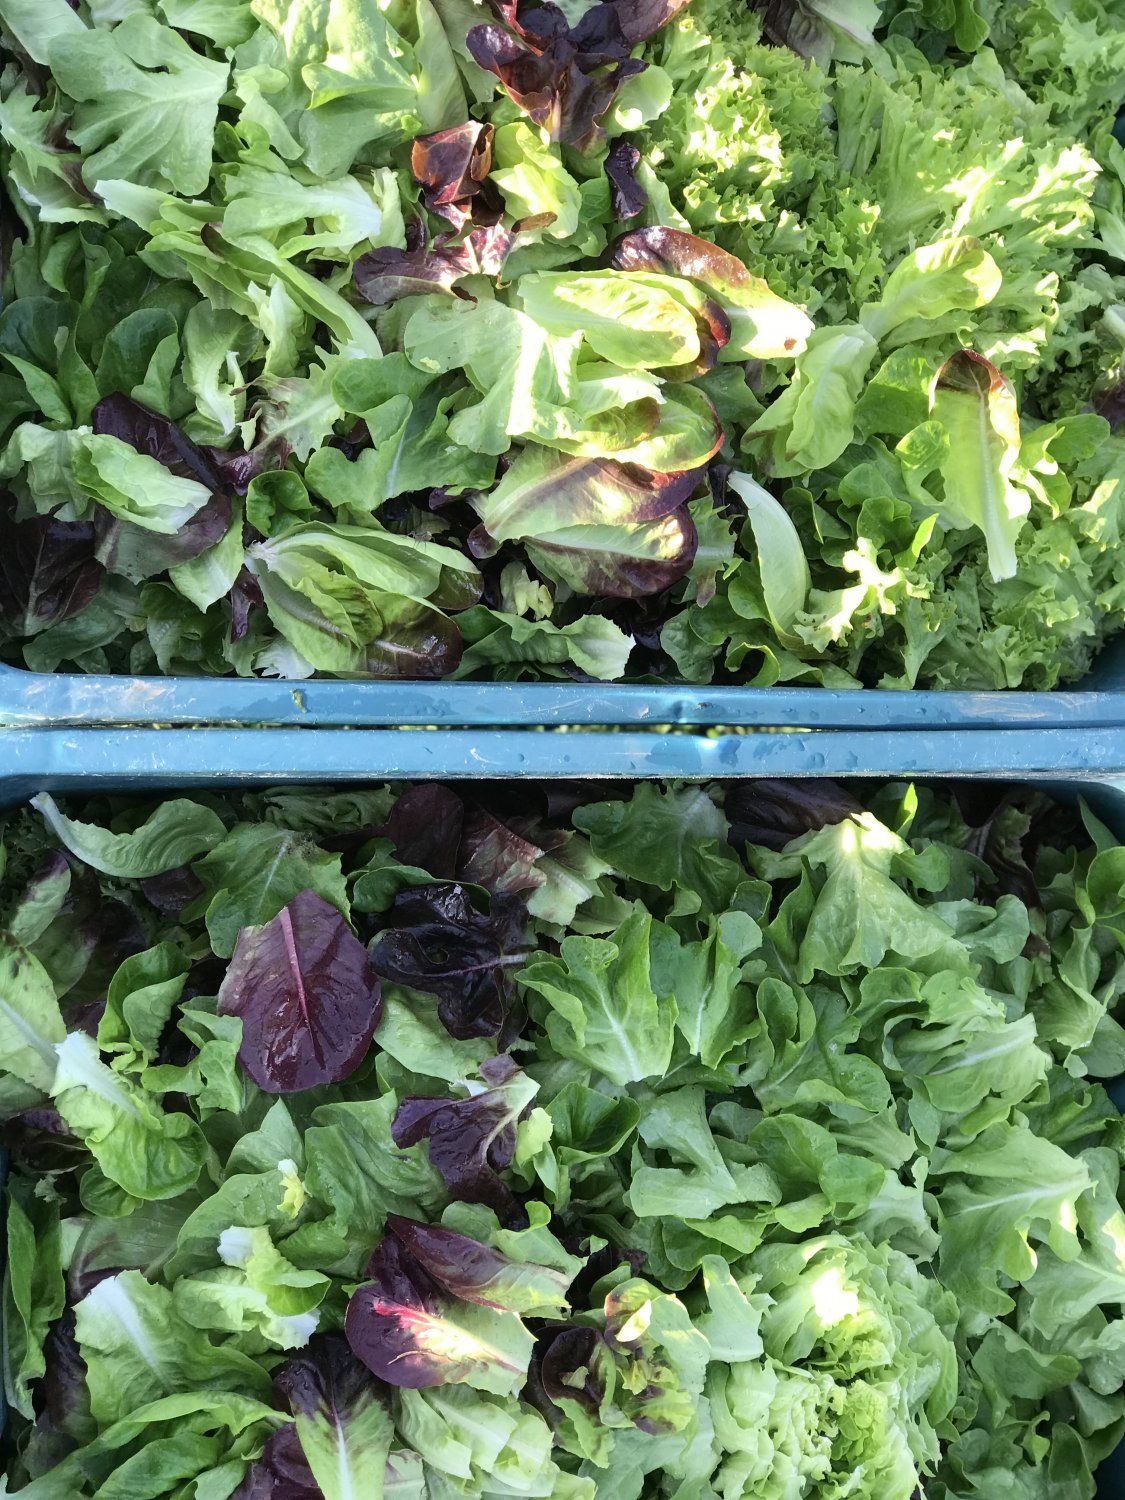 Previous Happening: Resilient Lettuce